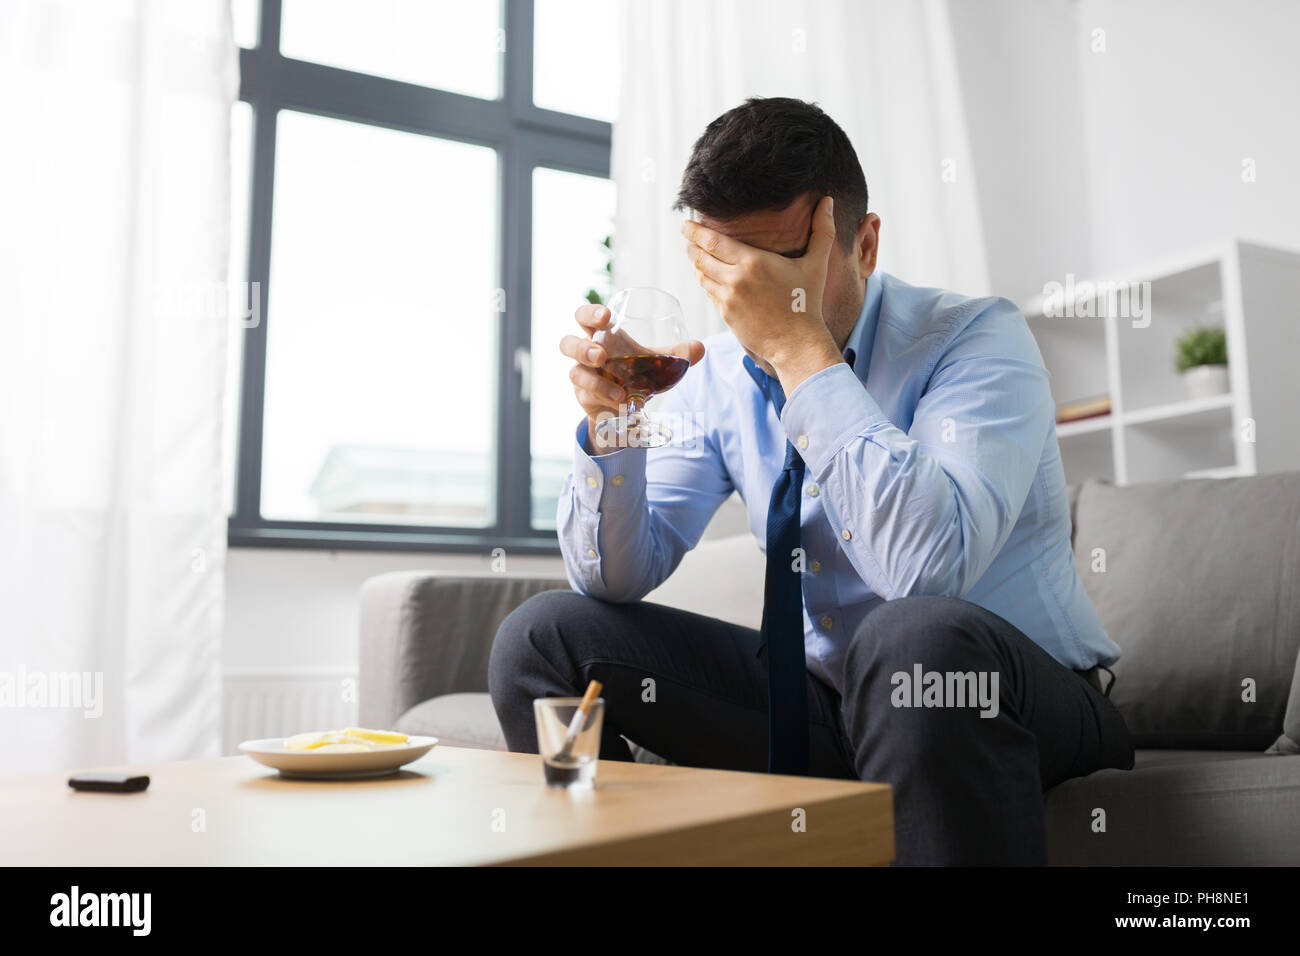 male alcoholic drinking alcohol at home Stock Photo